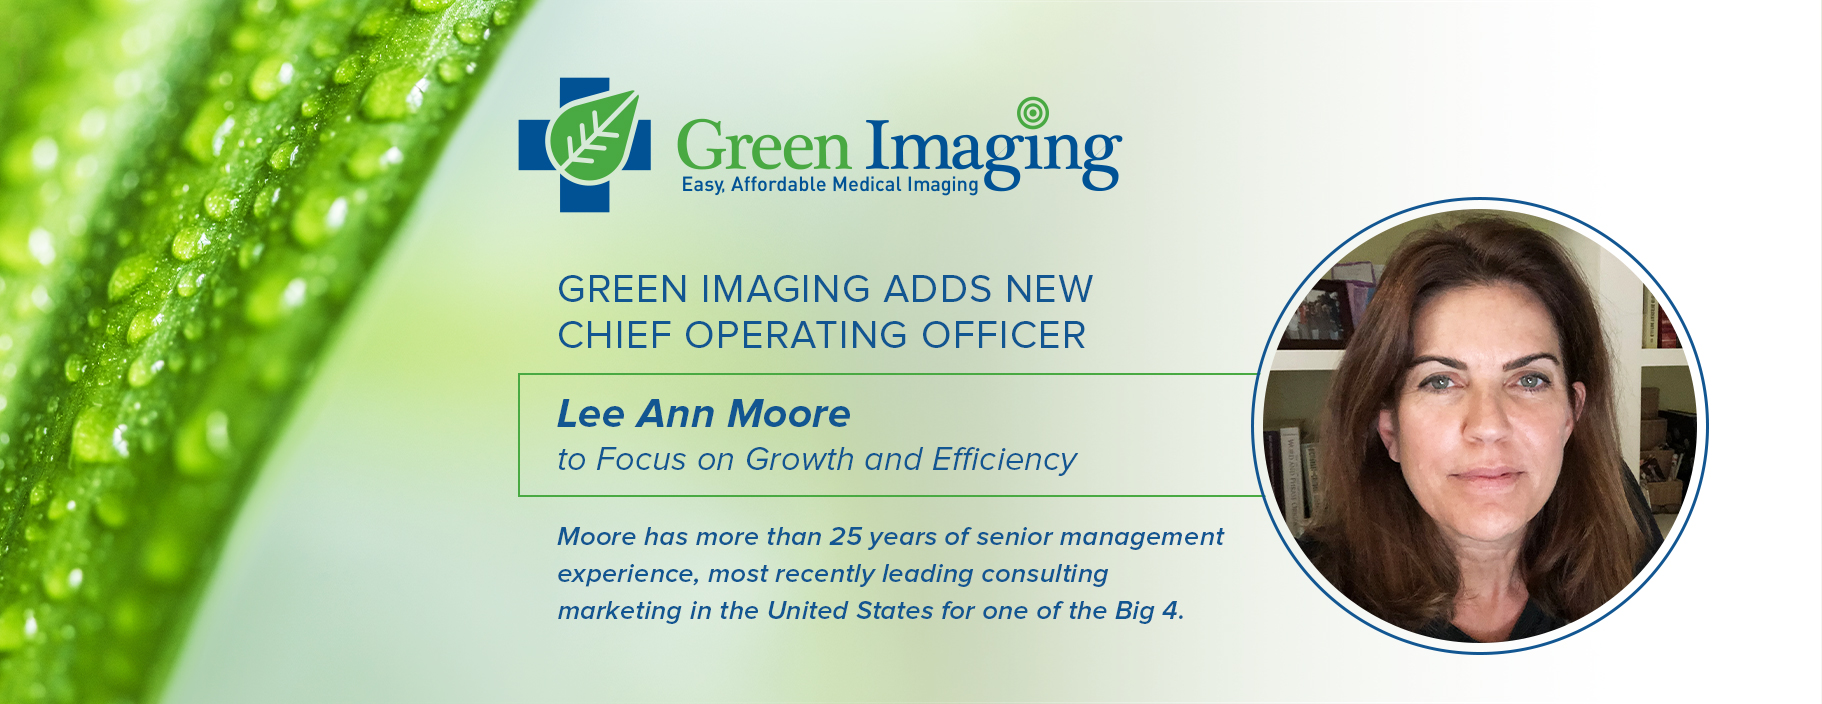 Lee Ann Moore is the new Chief Operating Officer at Green Imaging